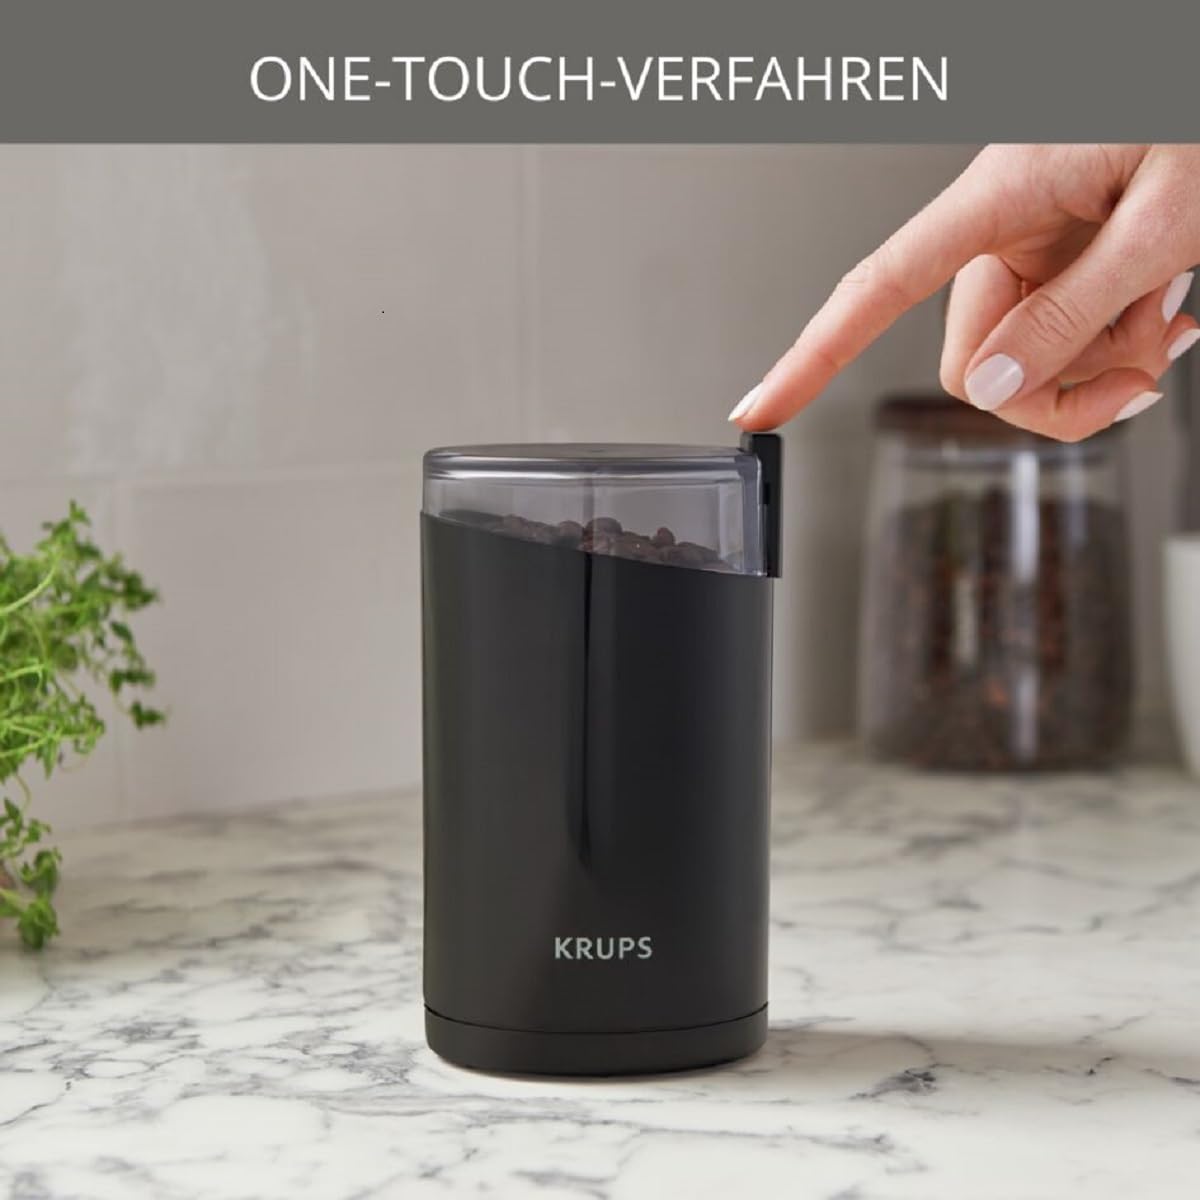 Krups One-Touch Coffee and Spice Grinder 12 Cup Easy to Use, One Touch Operation 200 Watts Coffee, Spices, Dry Herbs, Nuts Black